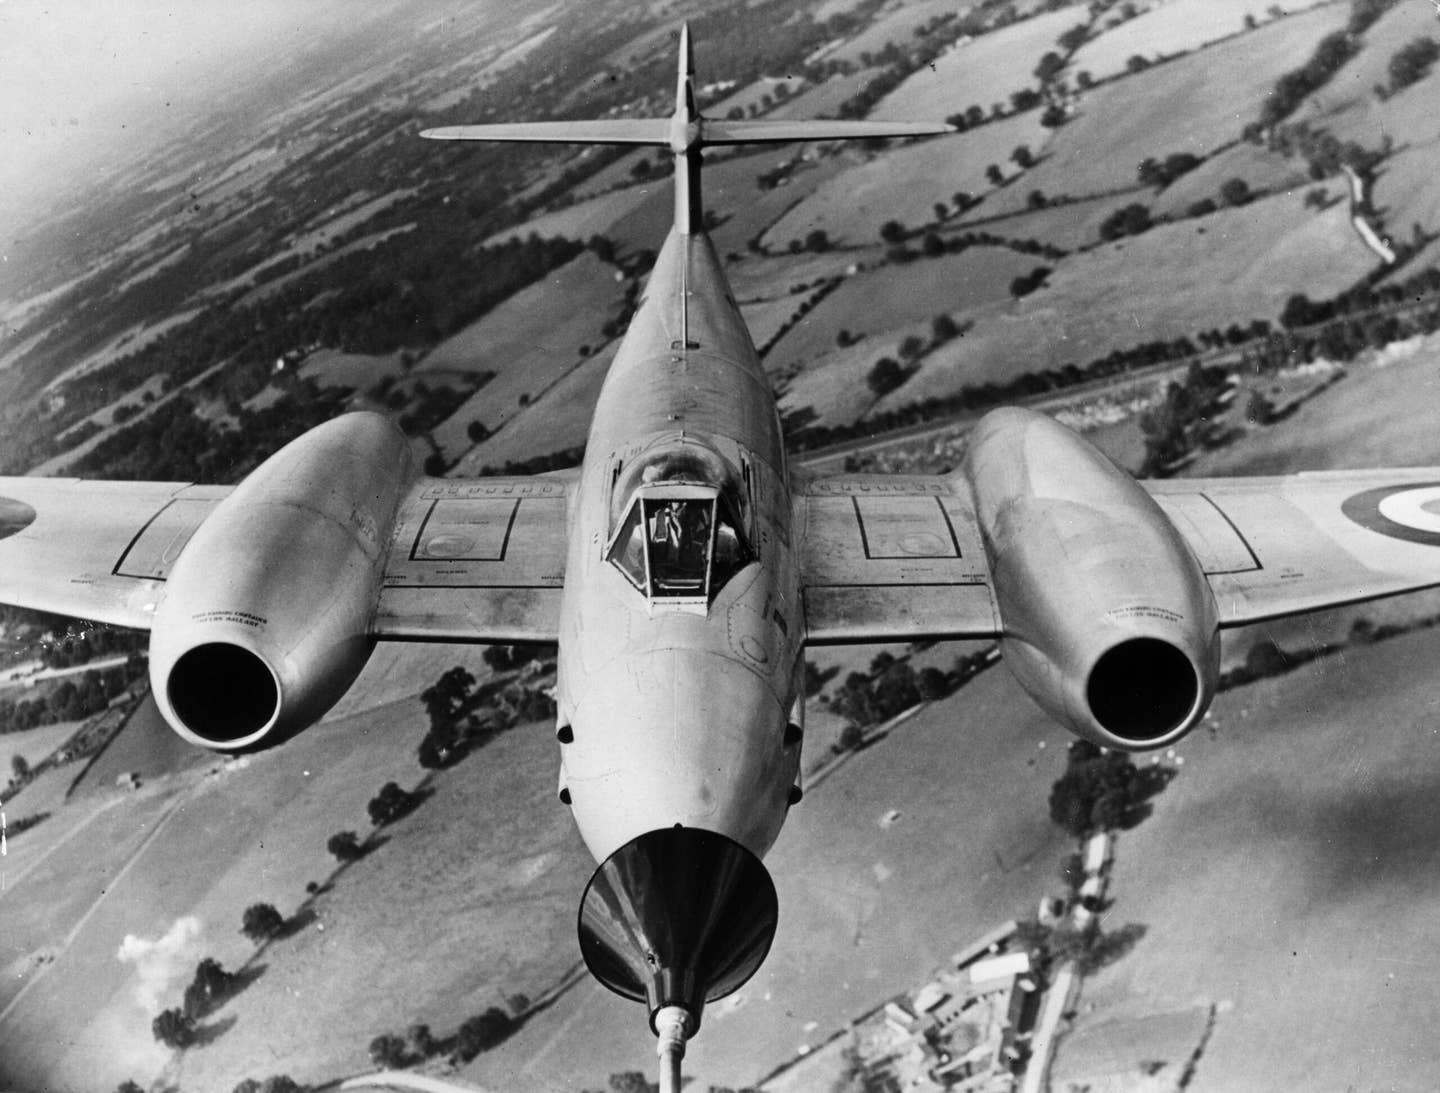 October 1950: A Gloster Meteor Mk 4 fighter tests the probe-and-drogue refueling system over Farnborough, England. <em>Photo by Keystone/Getty Images</em>